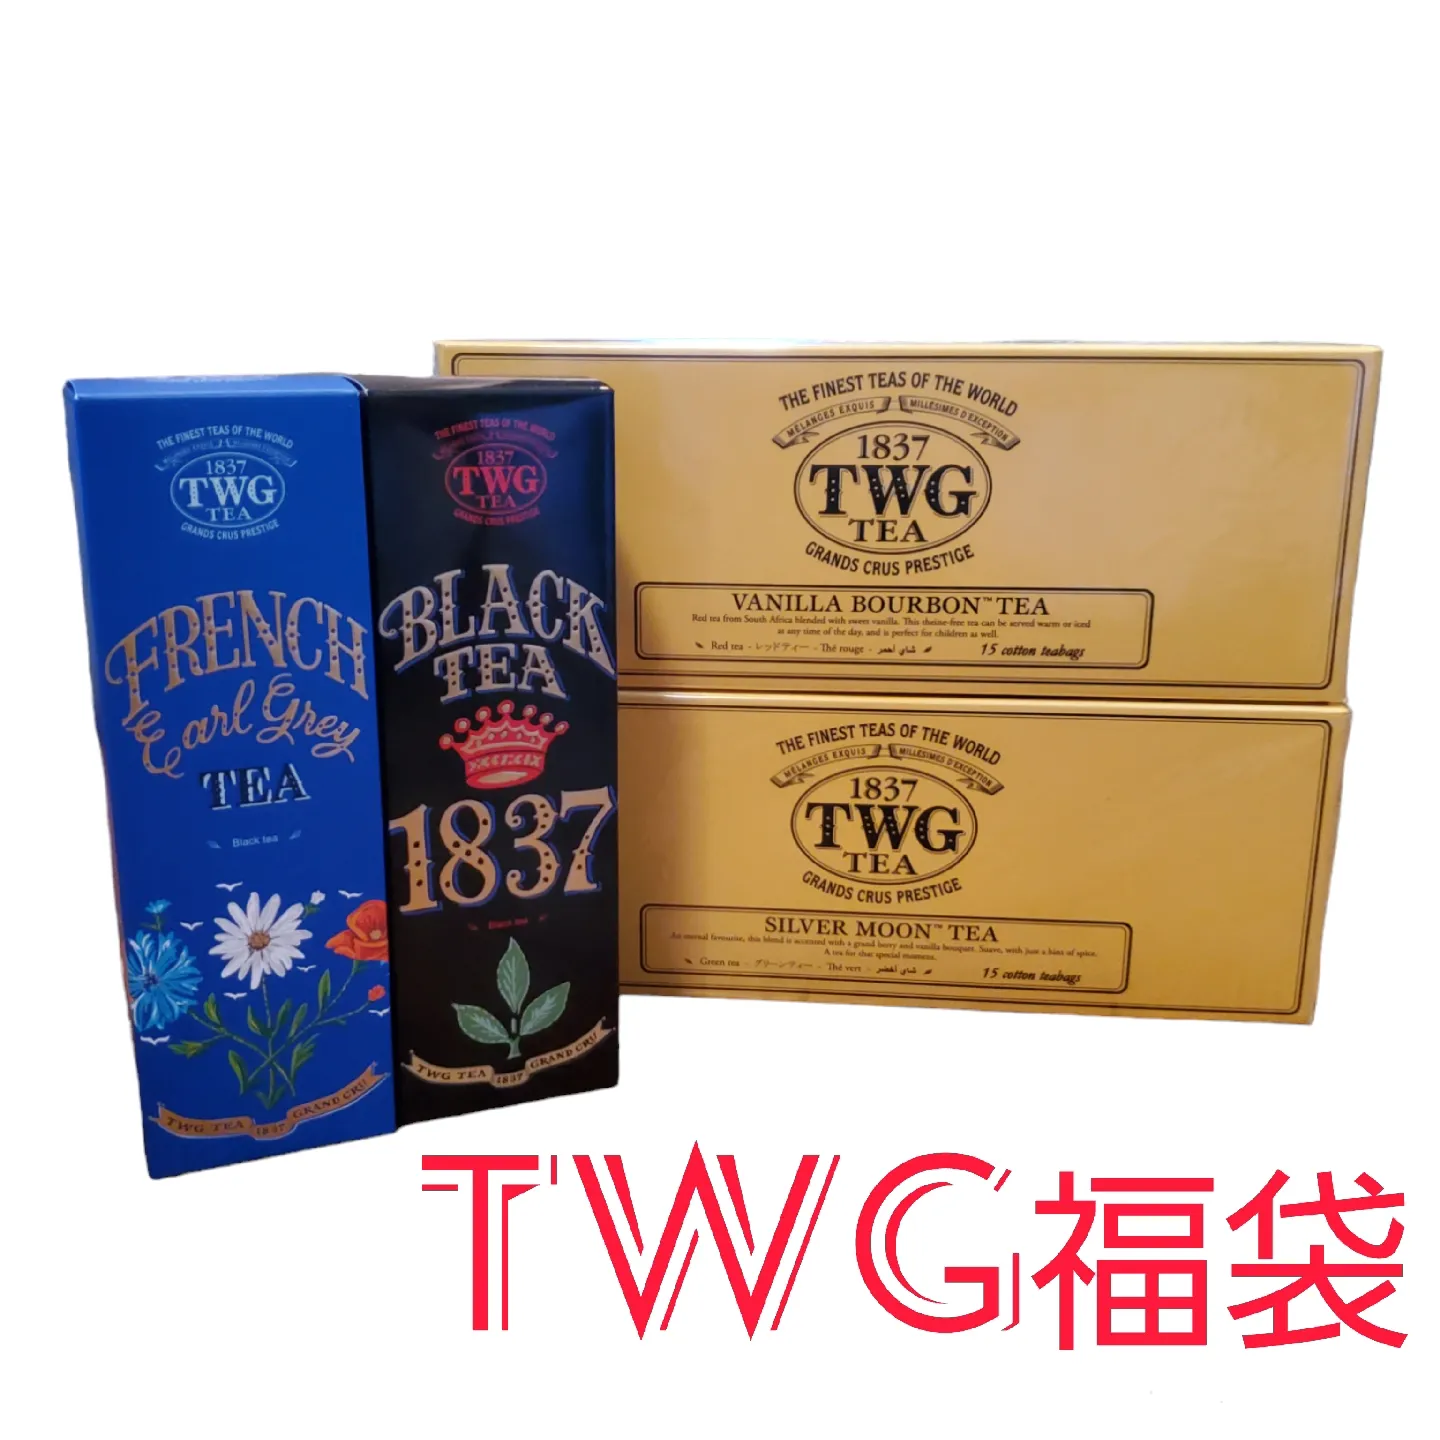 TWG 福袋 福缶 グリーン ハッピーバッグ 紅茶 缶 - 茶